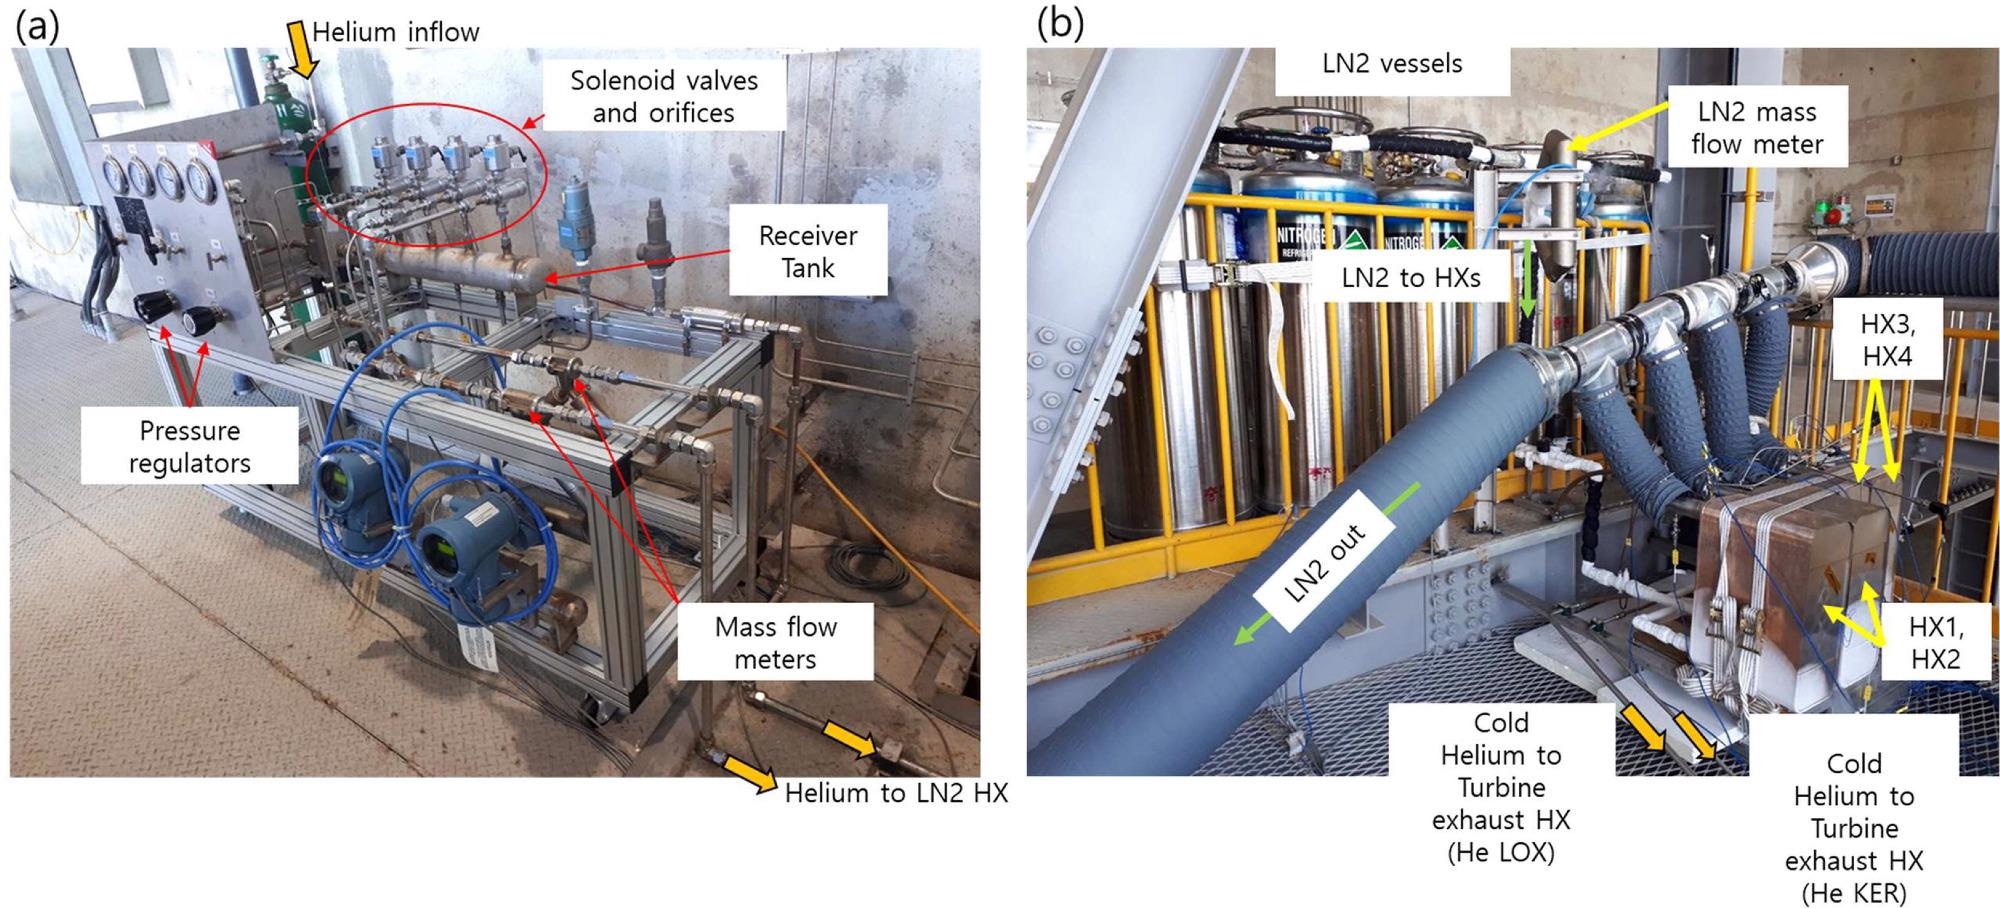 Photographs of (a) helium distribution system and (b) plate heat exchangers for cooling the helium gas using liquid nitrogen